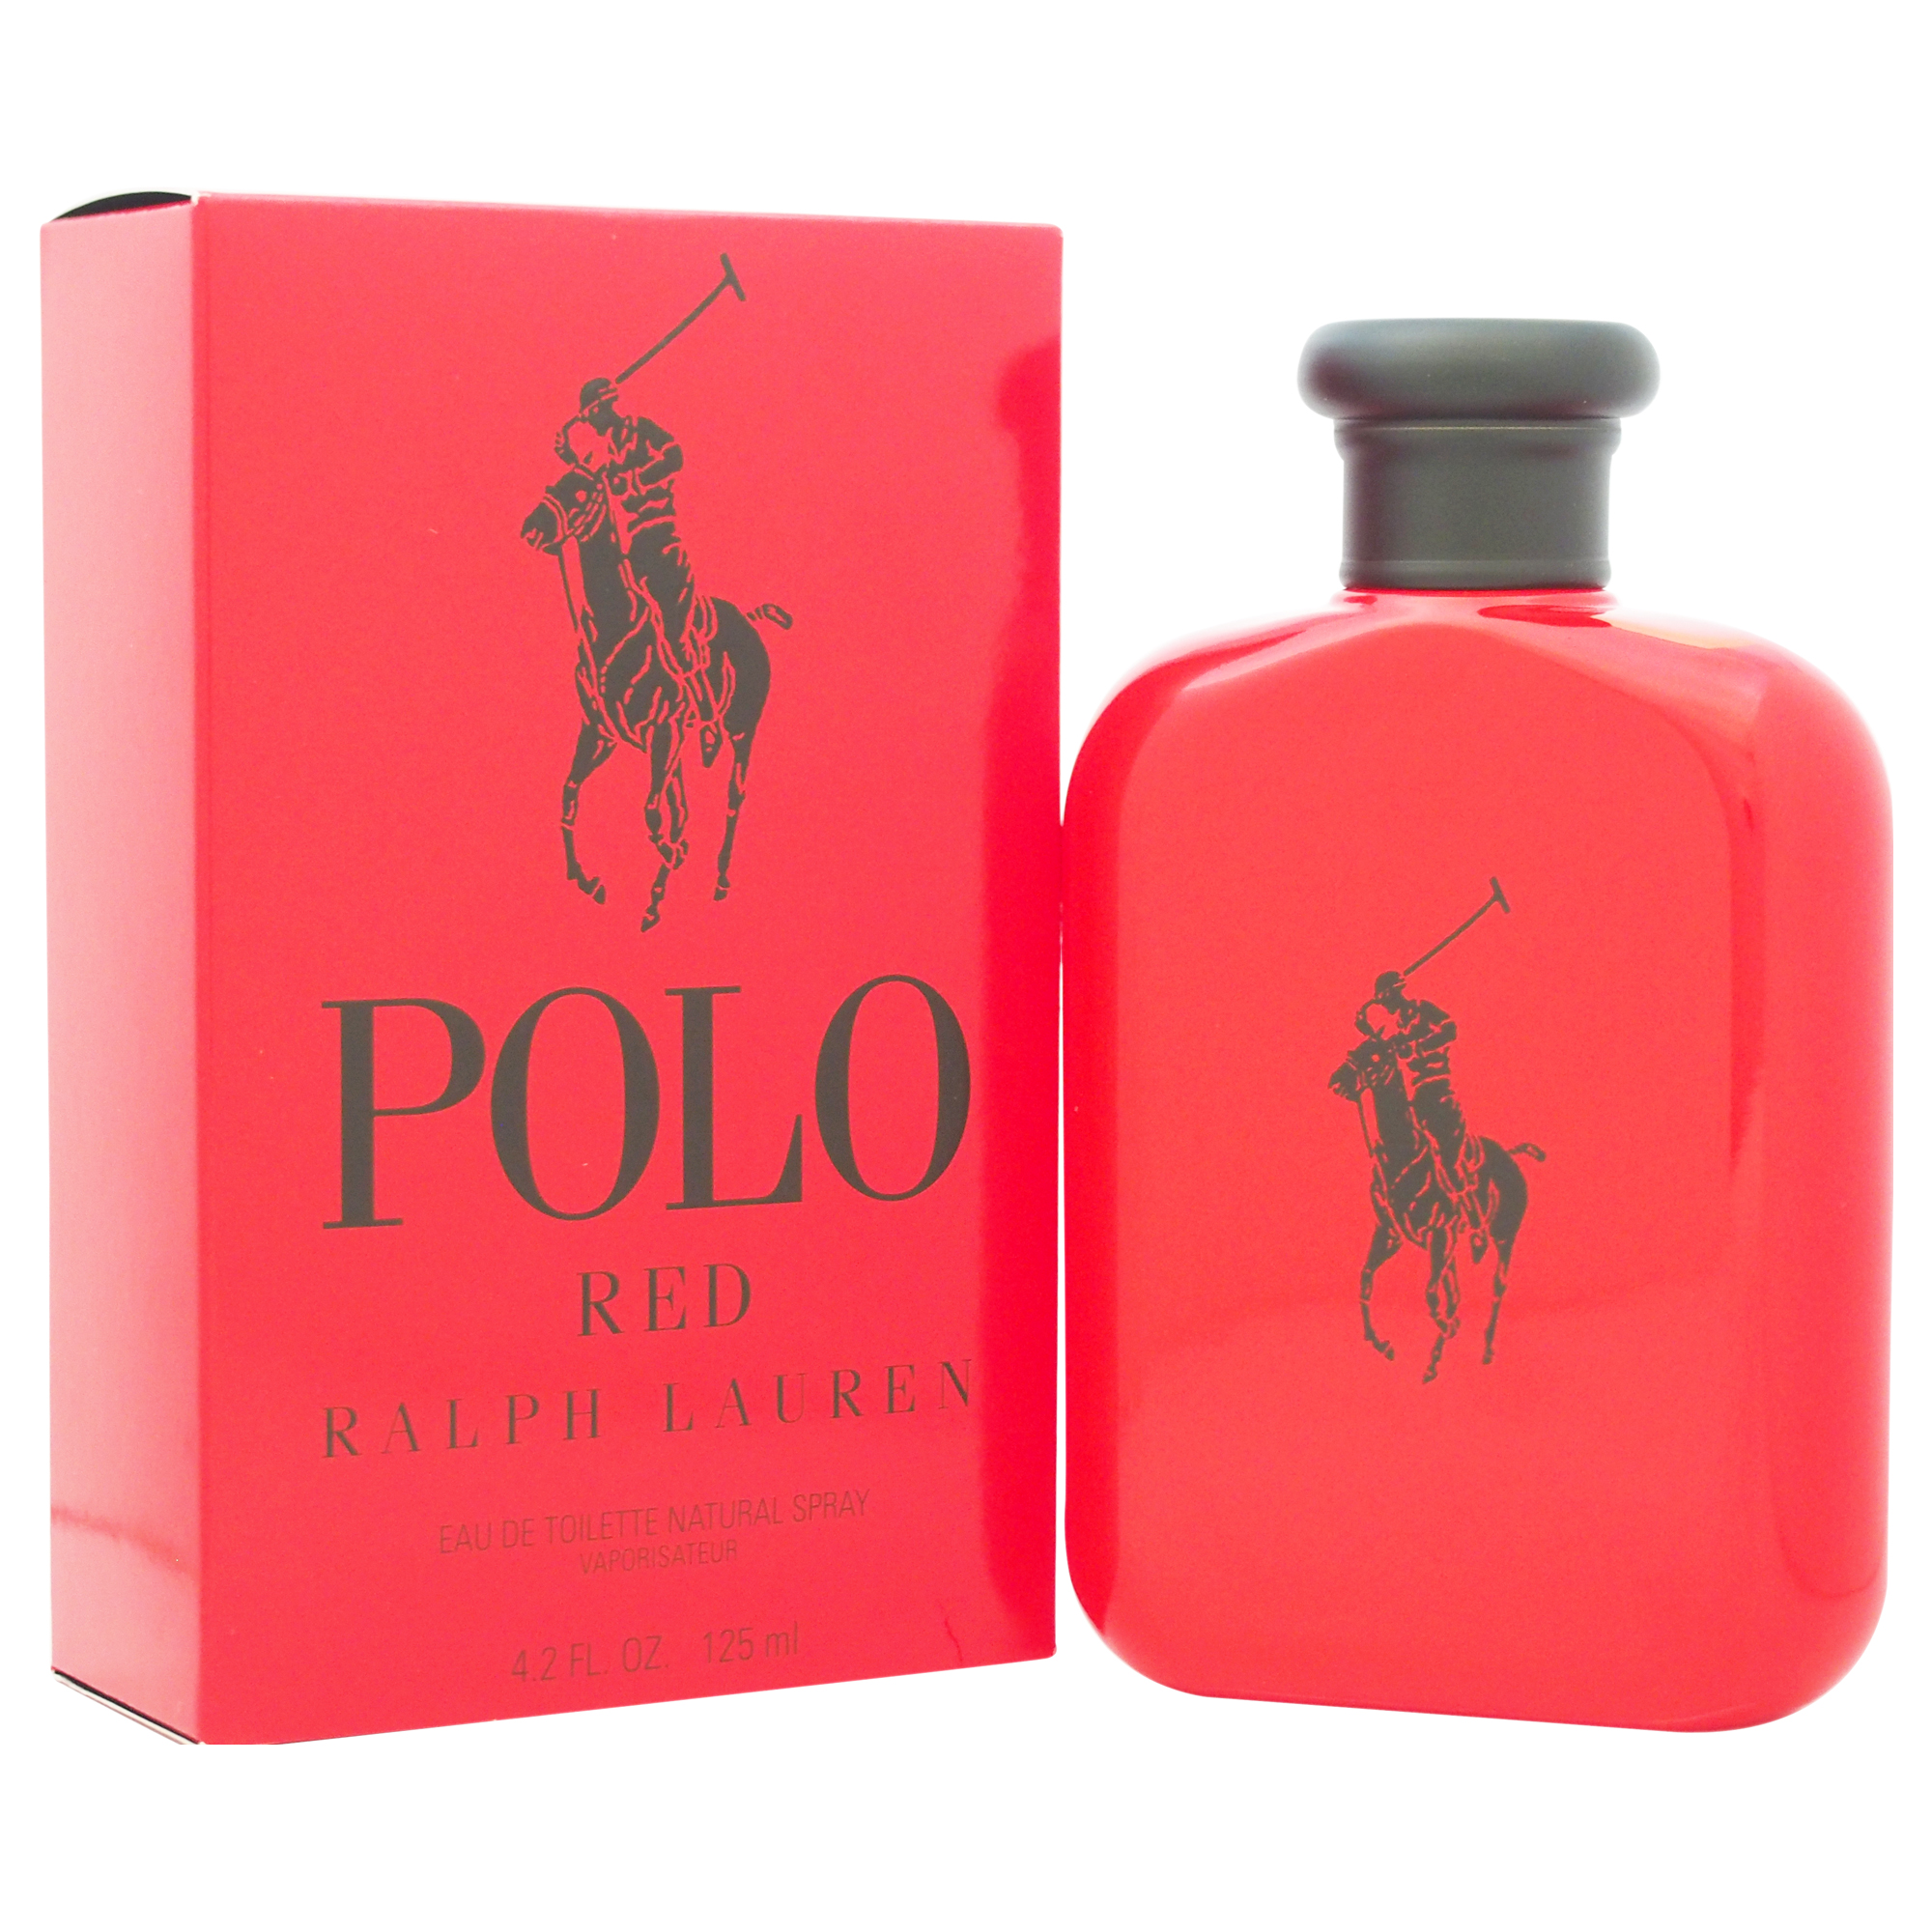 polo red scent